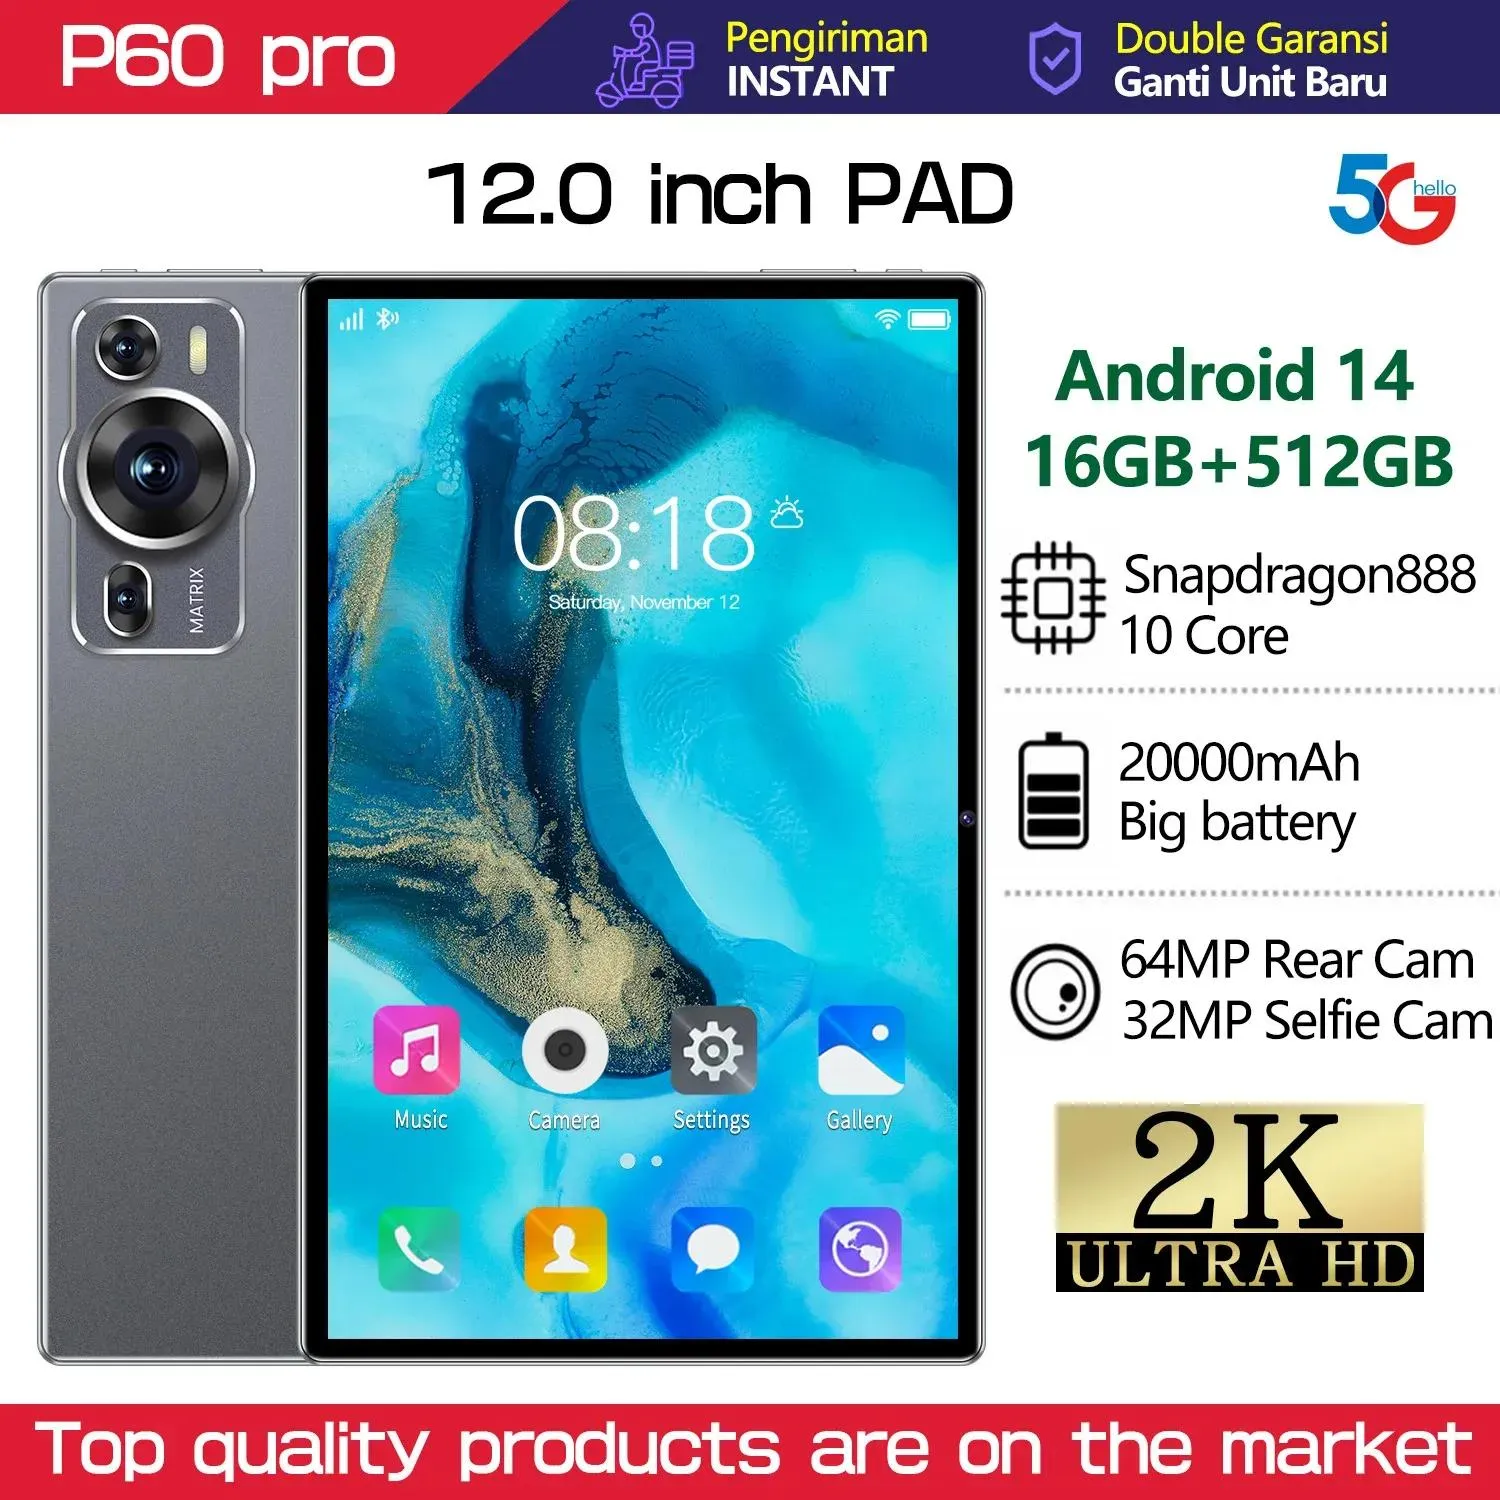 Merk PC Touch Tablet Android P60 Pro Global Tablete 12.0 inch HD 16G+512GB Snapdragon 888 5G Dual Sim Card of WiFi Google Play TE